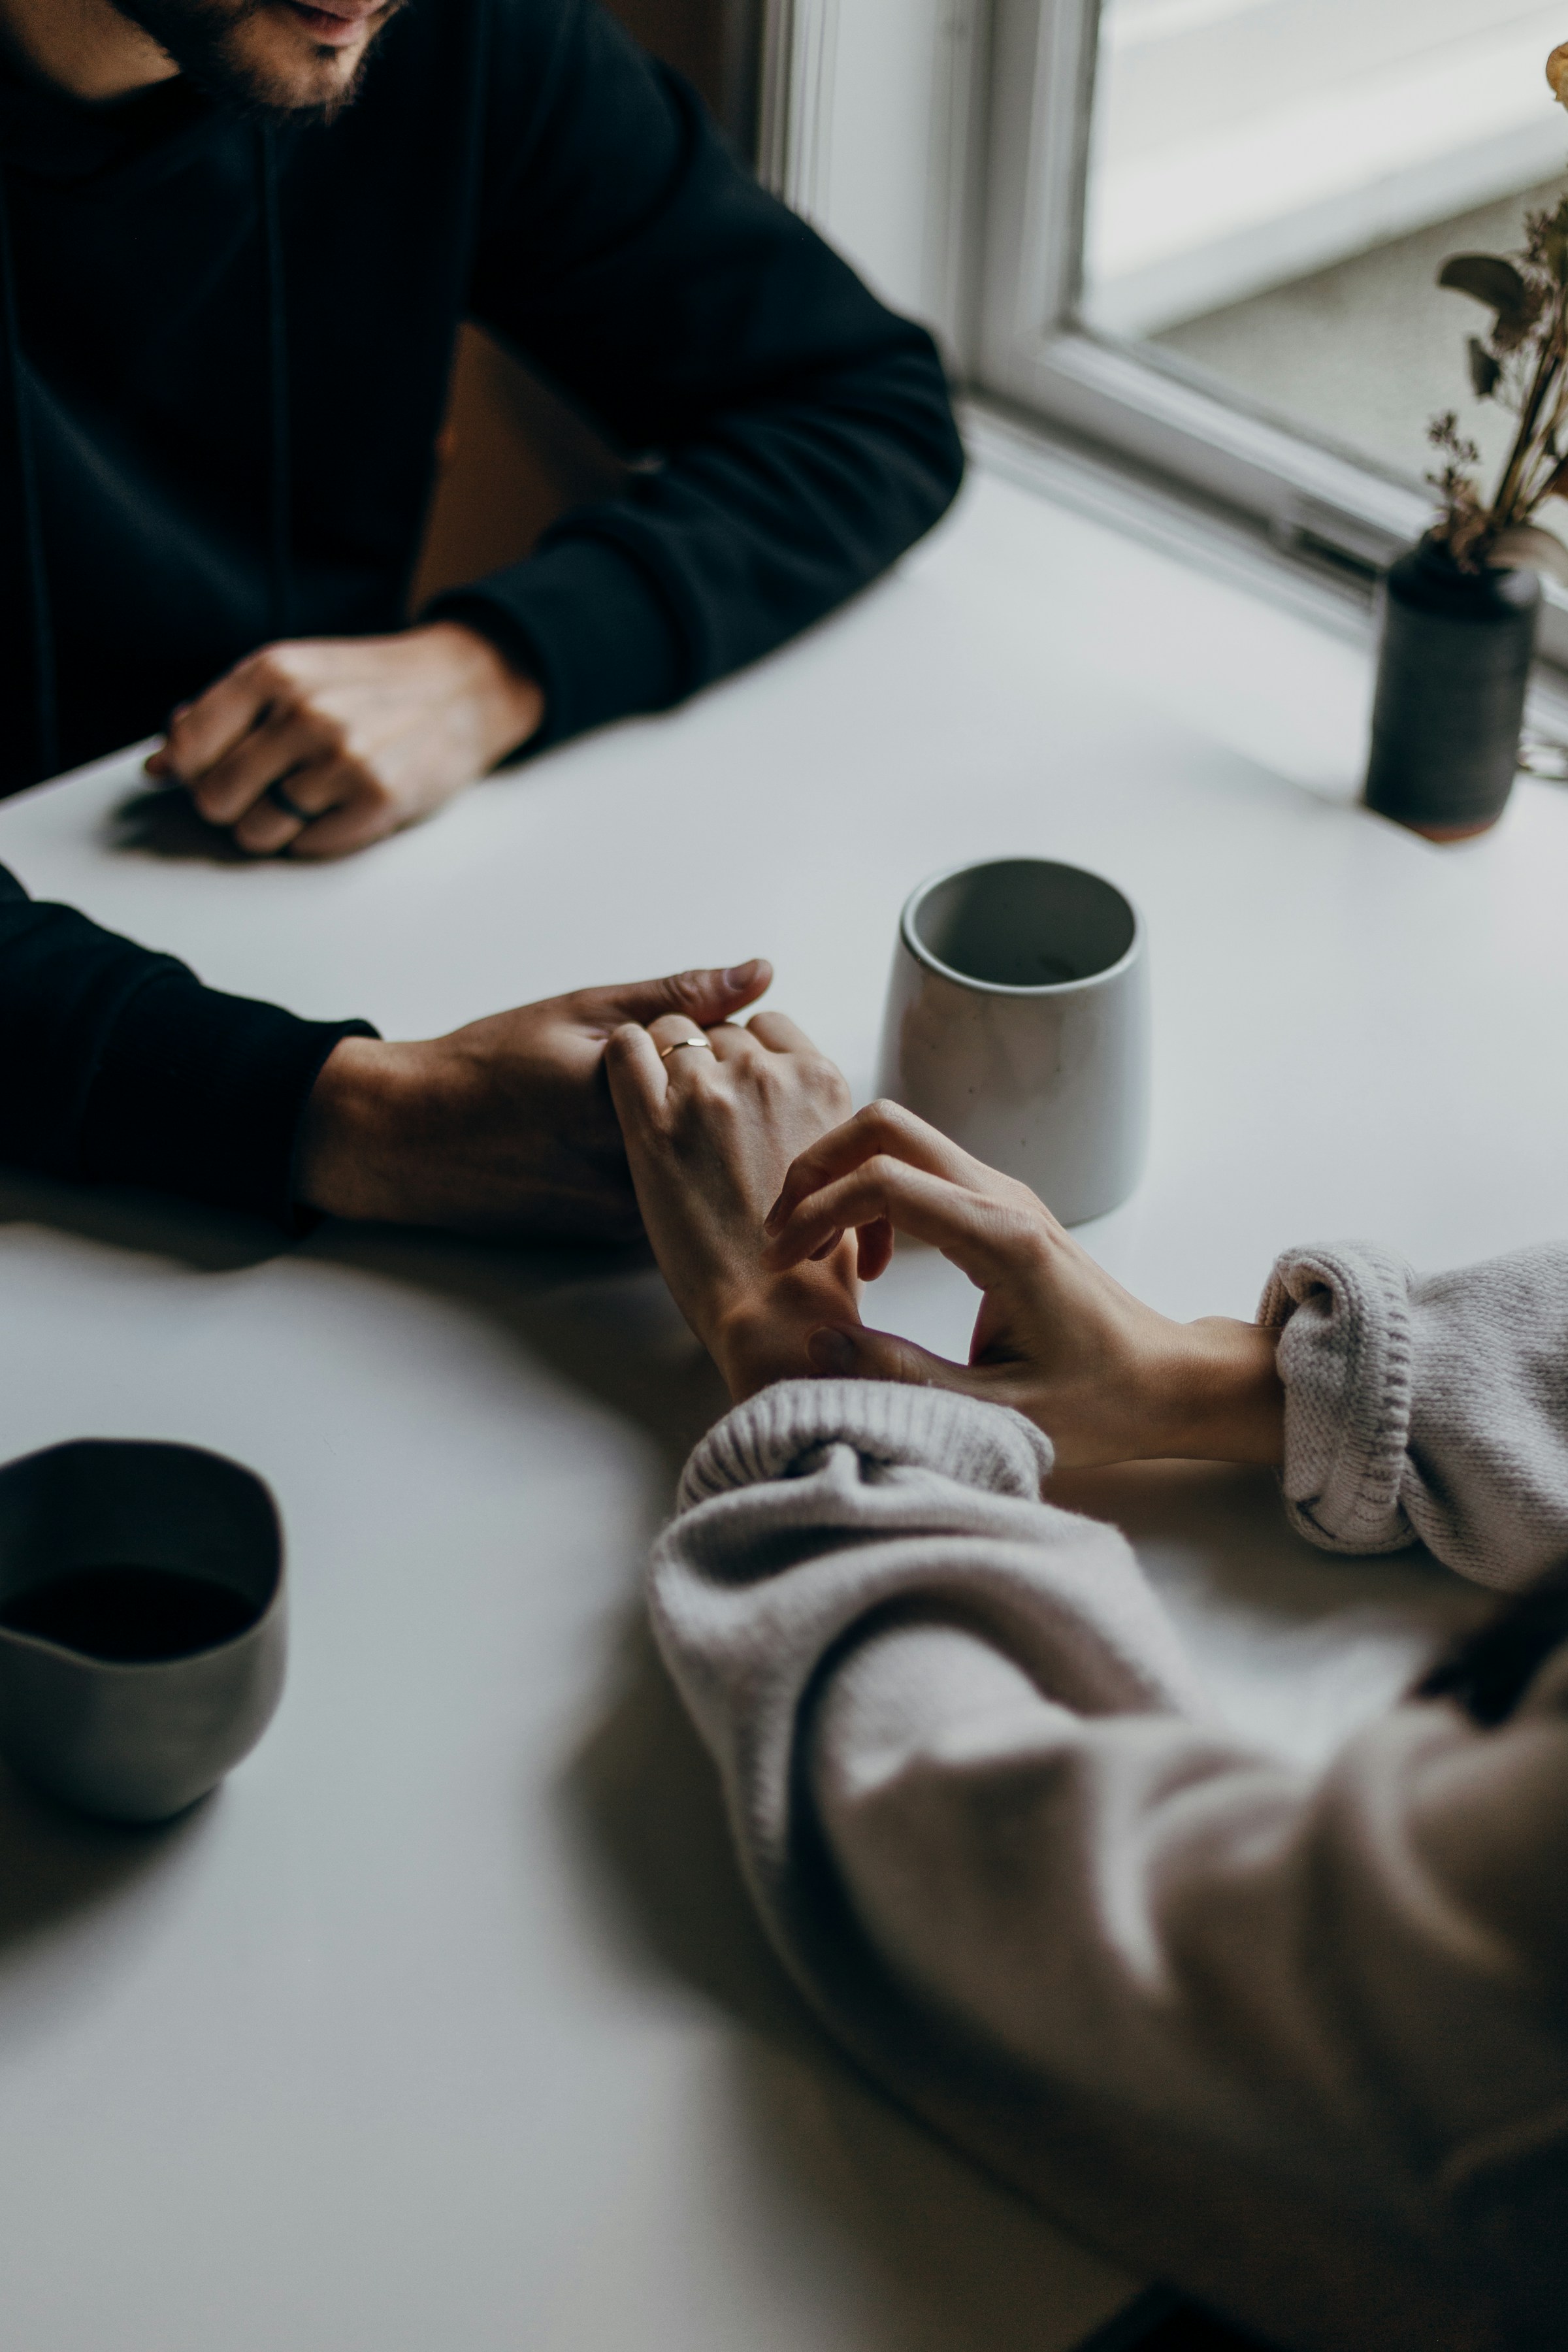 A couple holding hands on a table | Source: Unsplash